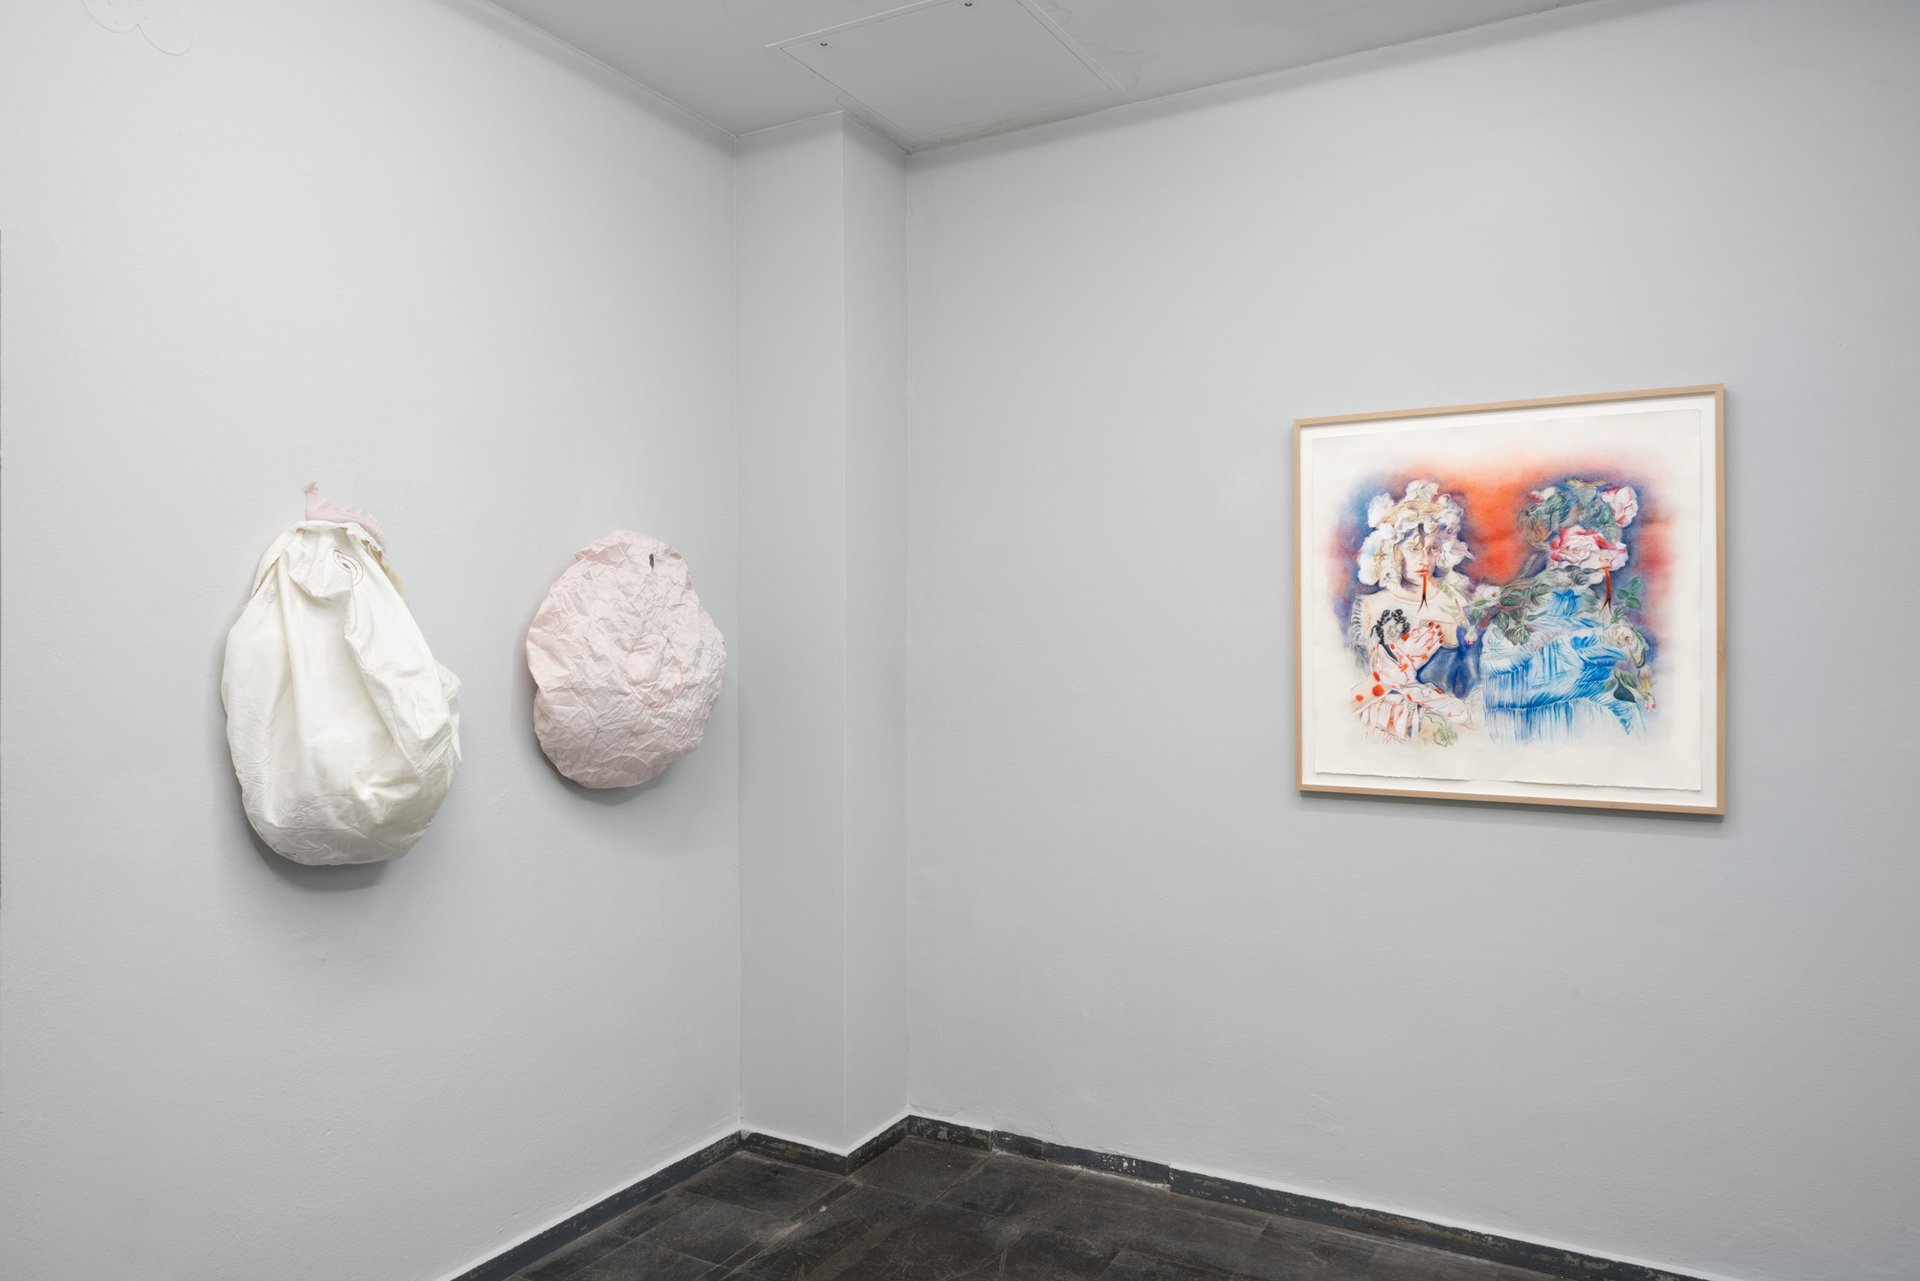 From left to right:   ALANA LAKE, Crash, 2021
Used car airbags, dimensions vary  (from the involuntary sculpture series)  2 in total, 1 white, 1 pink  MARIANNA IGNATAKI, The Great Lick, 2021 Watercolor, gouache, color pigments, graphite and colored pencils on paper 80x80cm